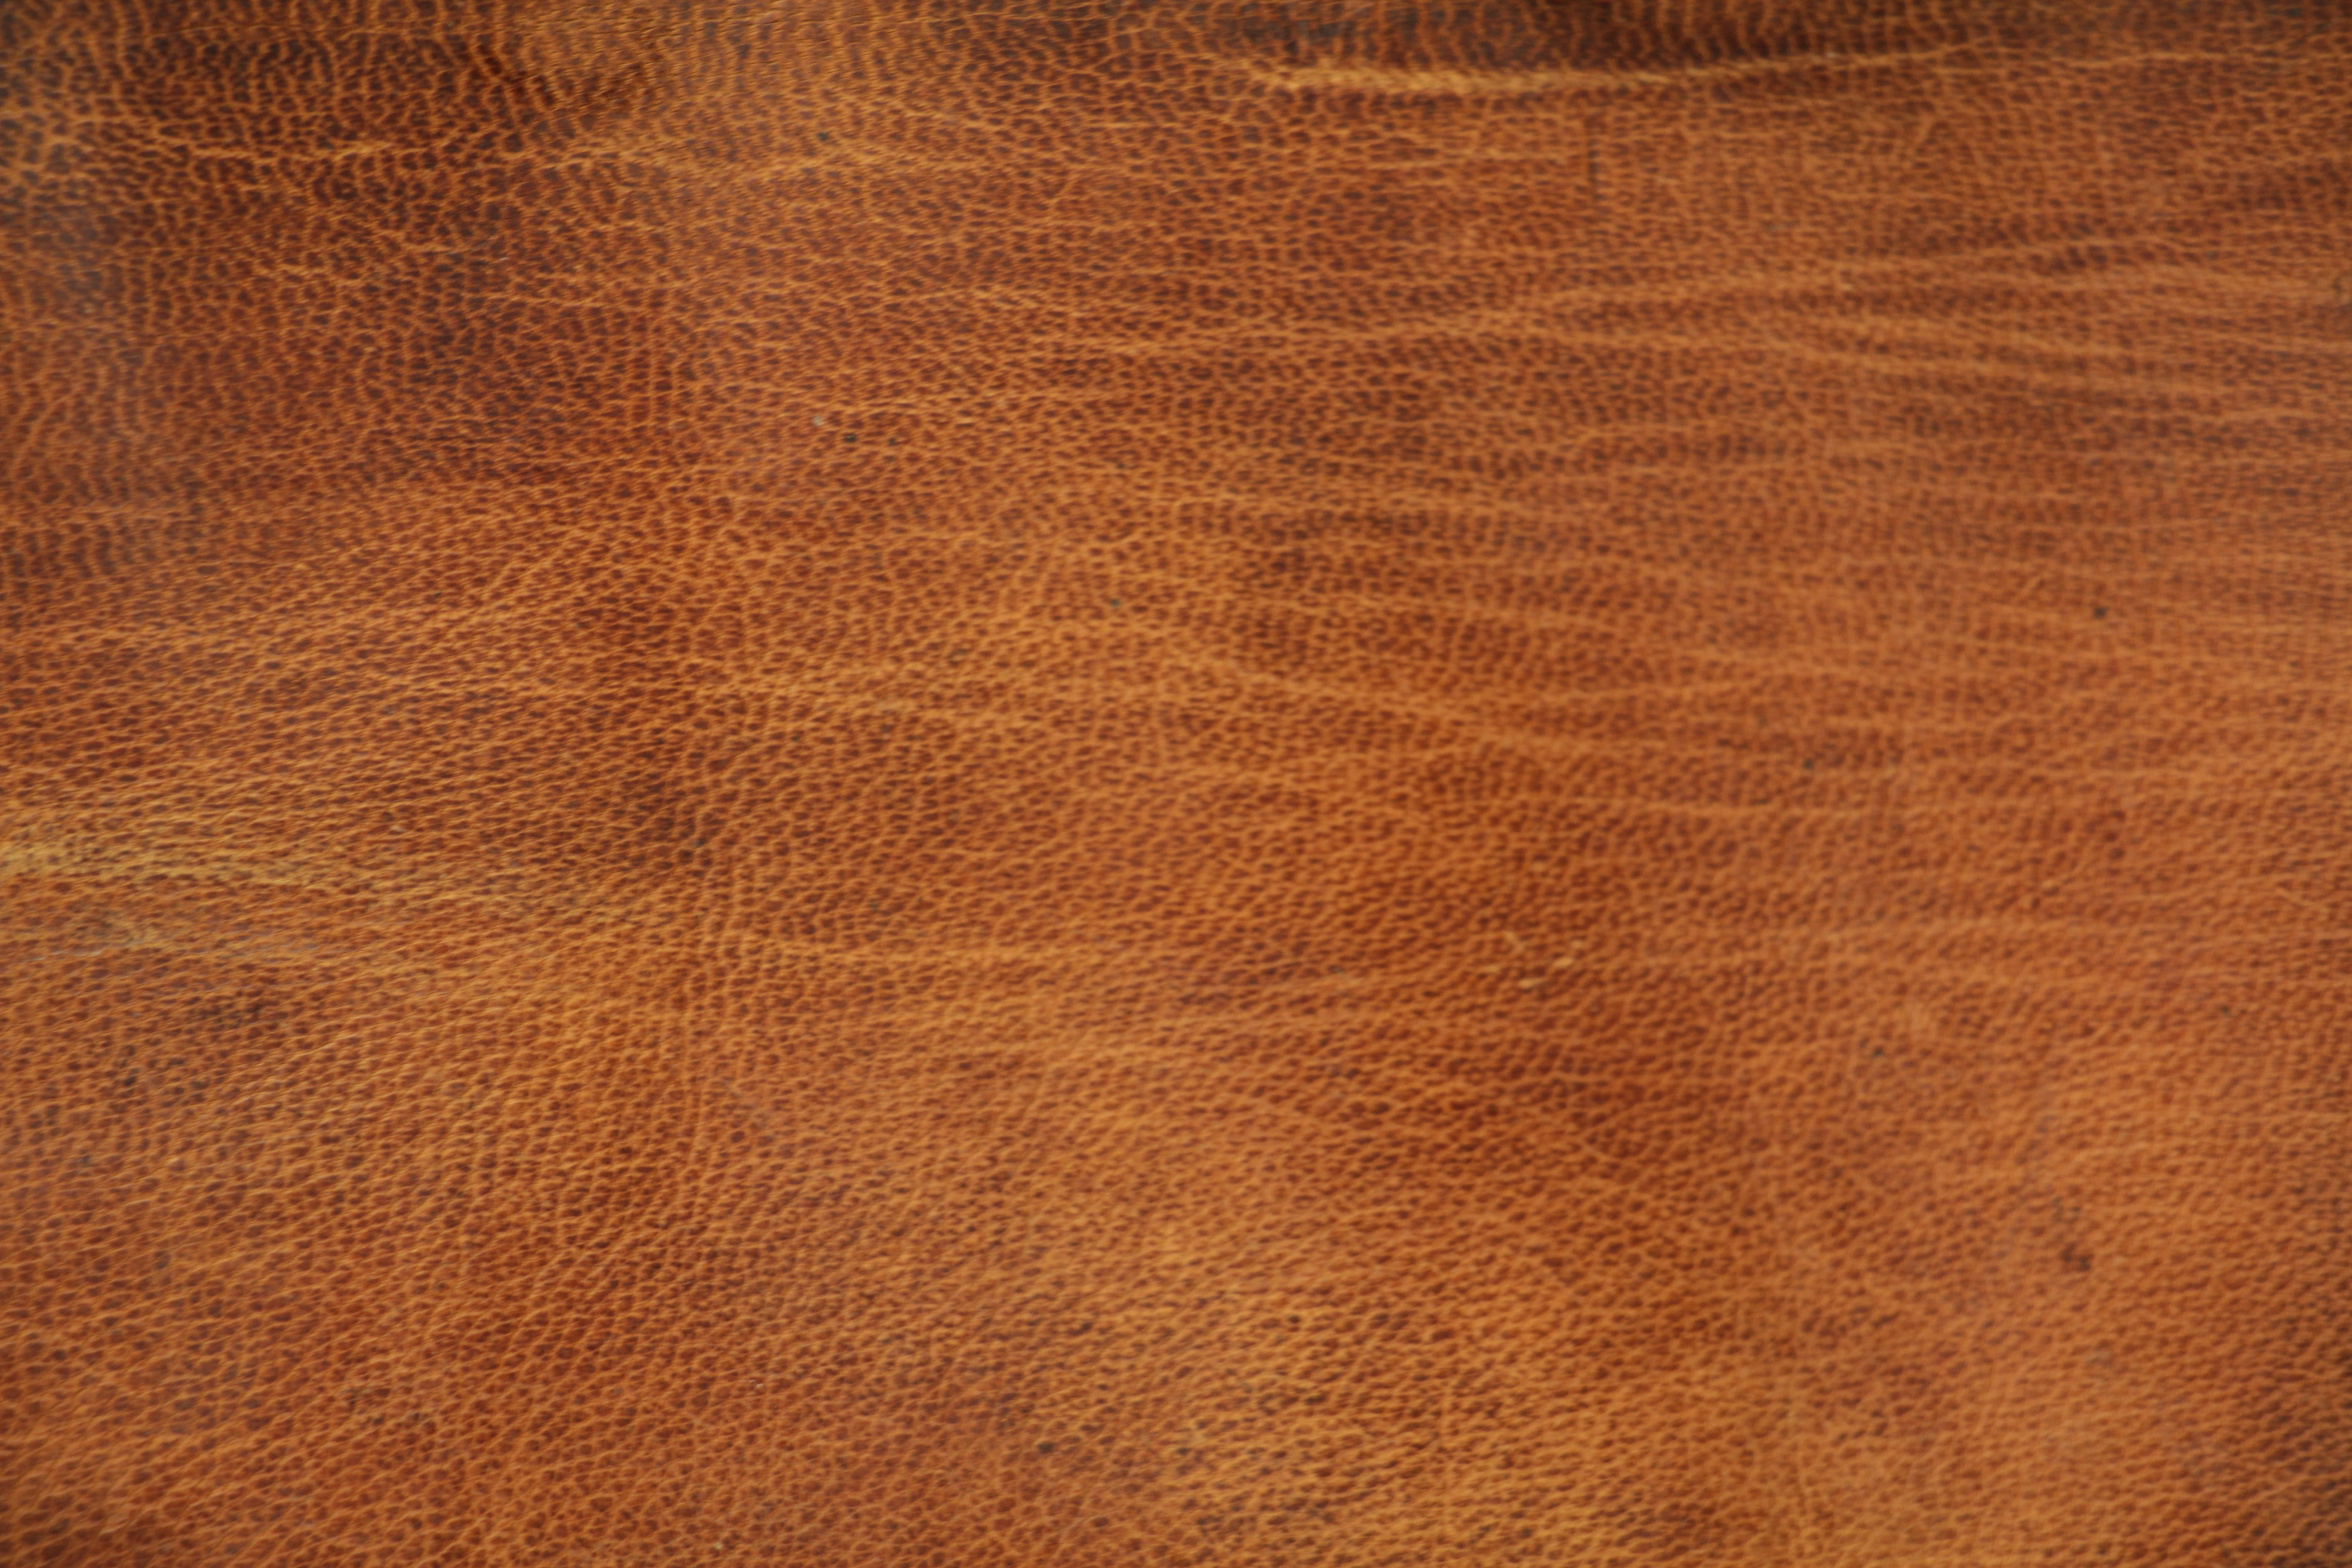 tan leather texture skin wrinkle material fabric background ...